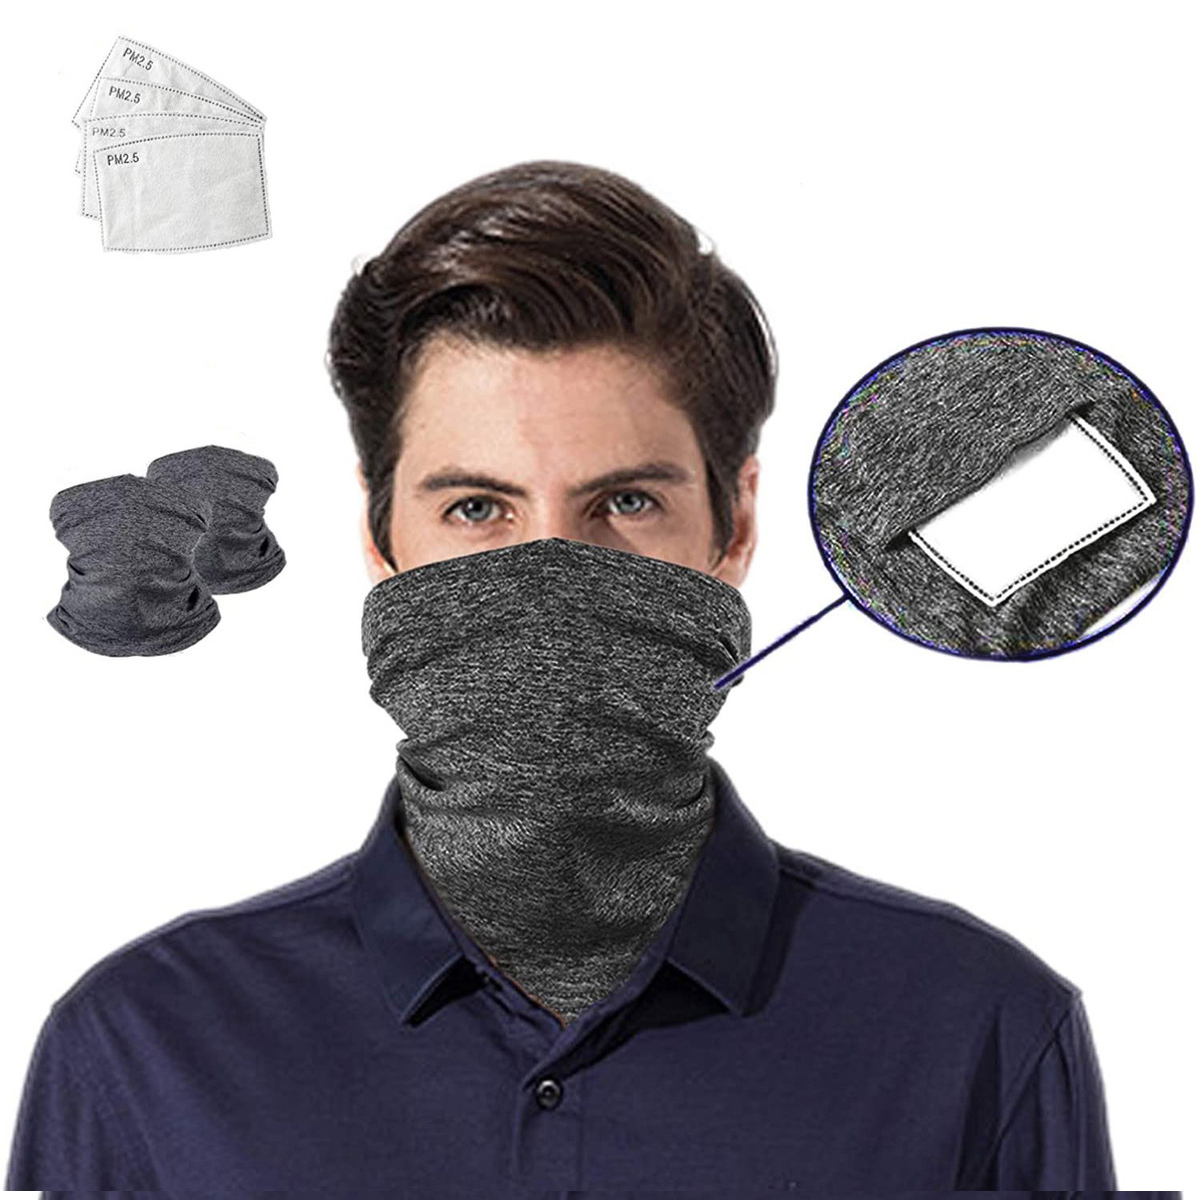 Outdoor-Dustproof-Breathable-Sport-Head-Scarves-Face-Mask-With-5-Filter-Pads-Windproof-PM25-Sunscree-1683314-9